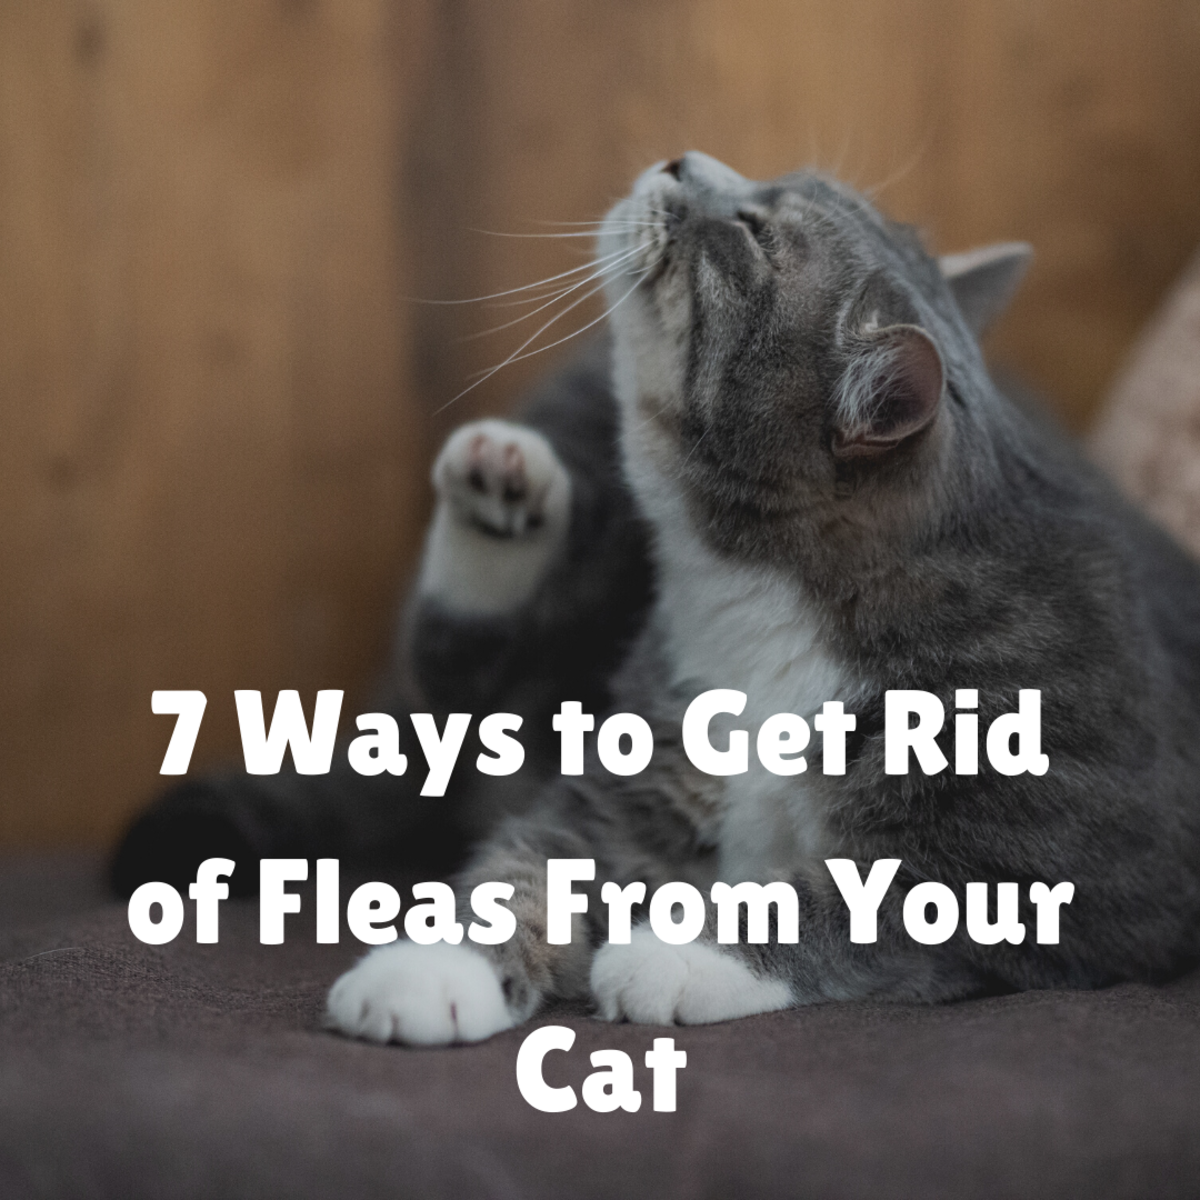 7 Ways to Get Rid of Fleas From Your Cat